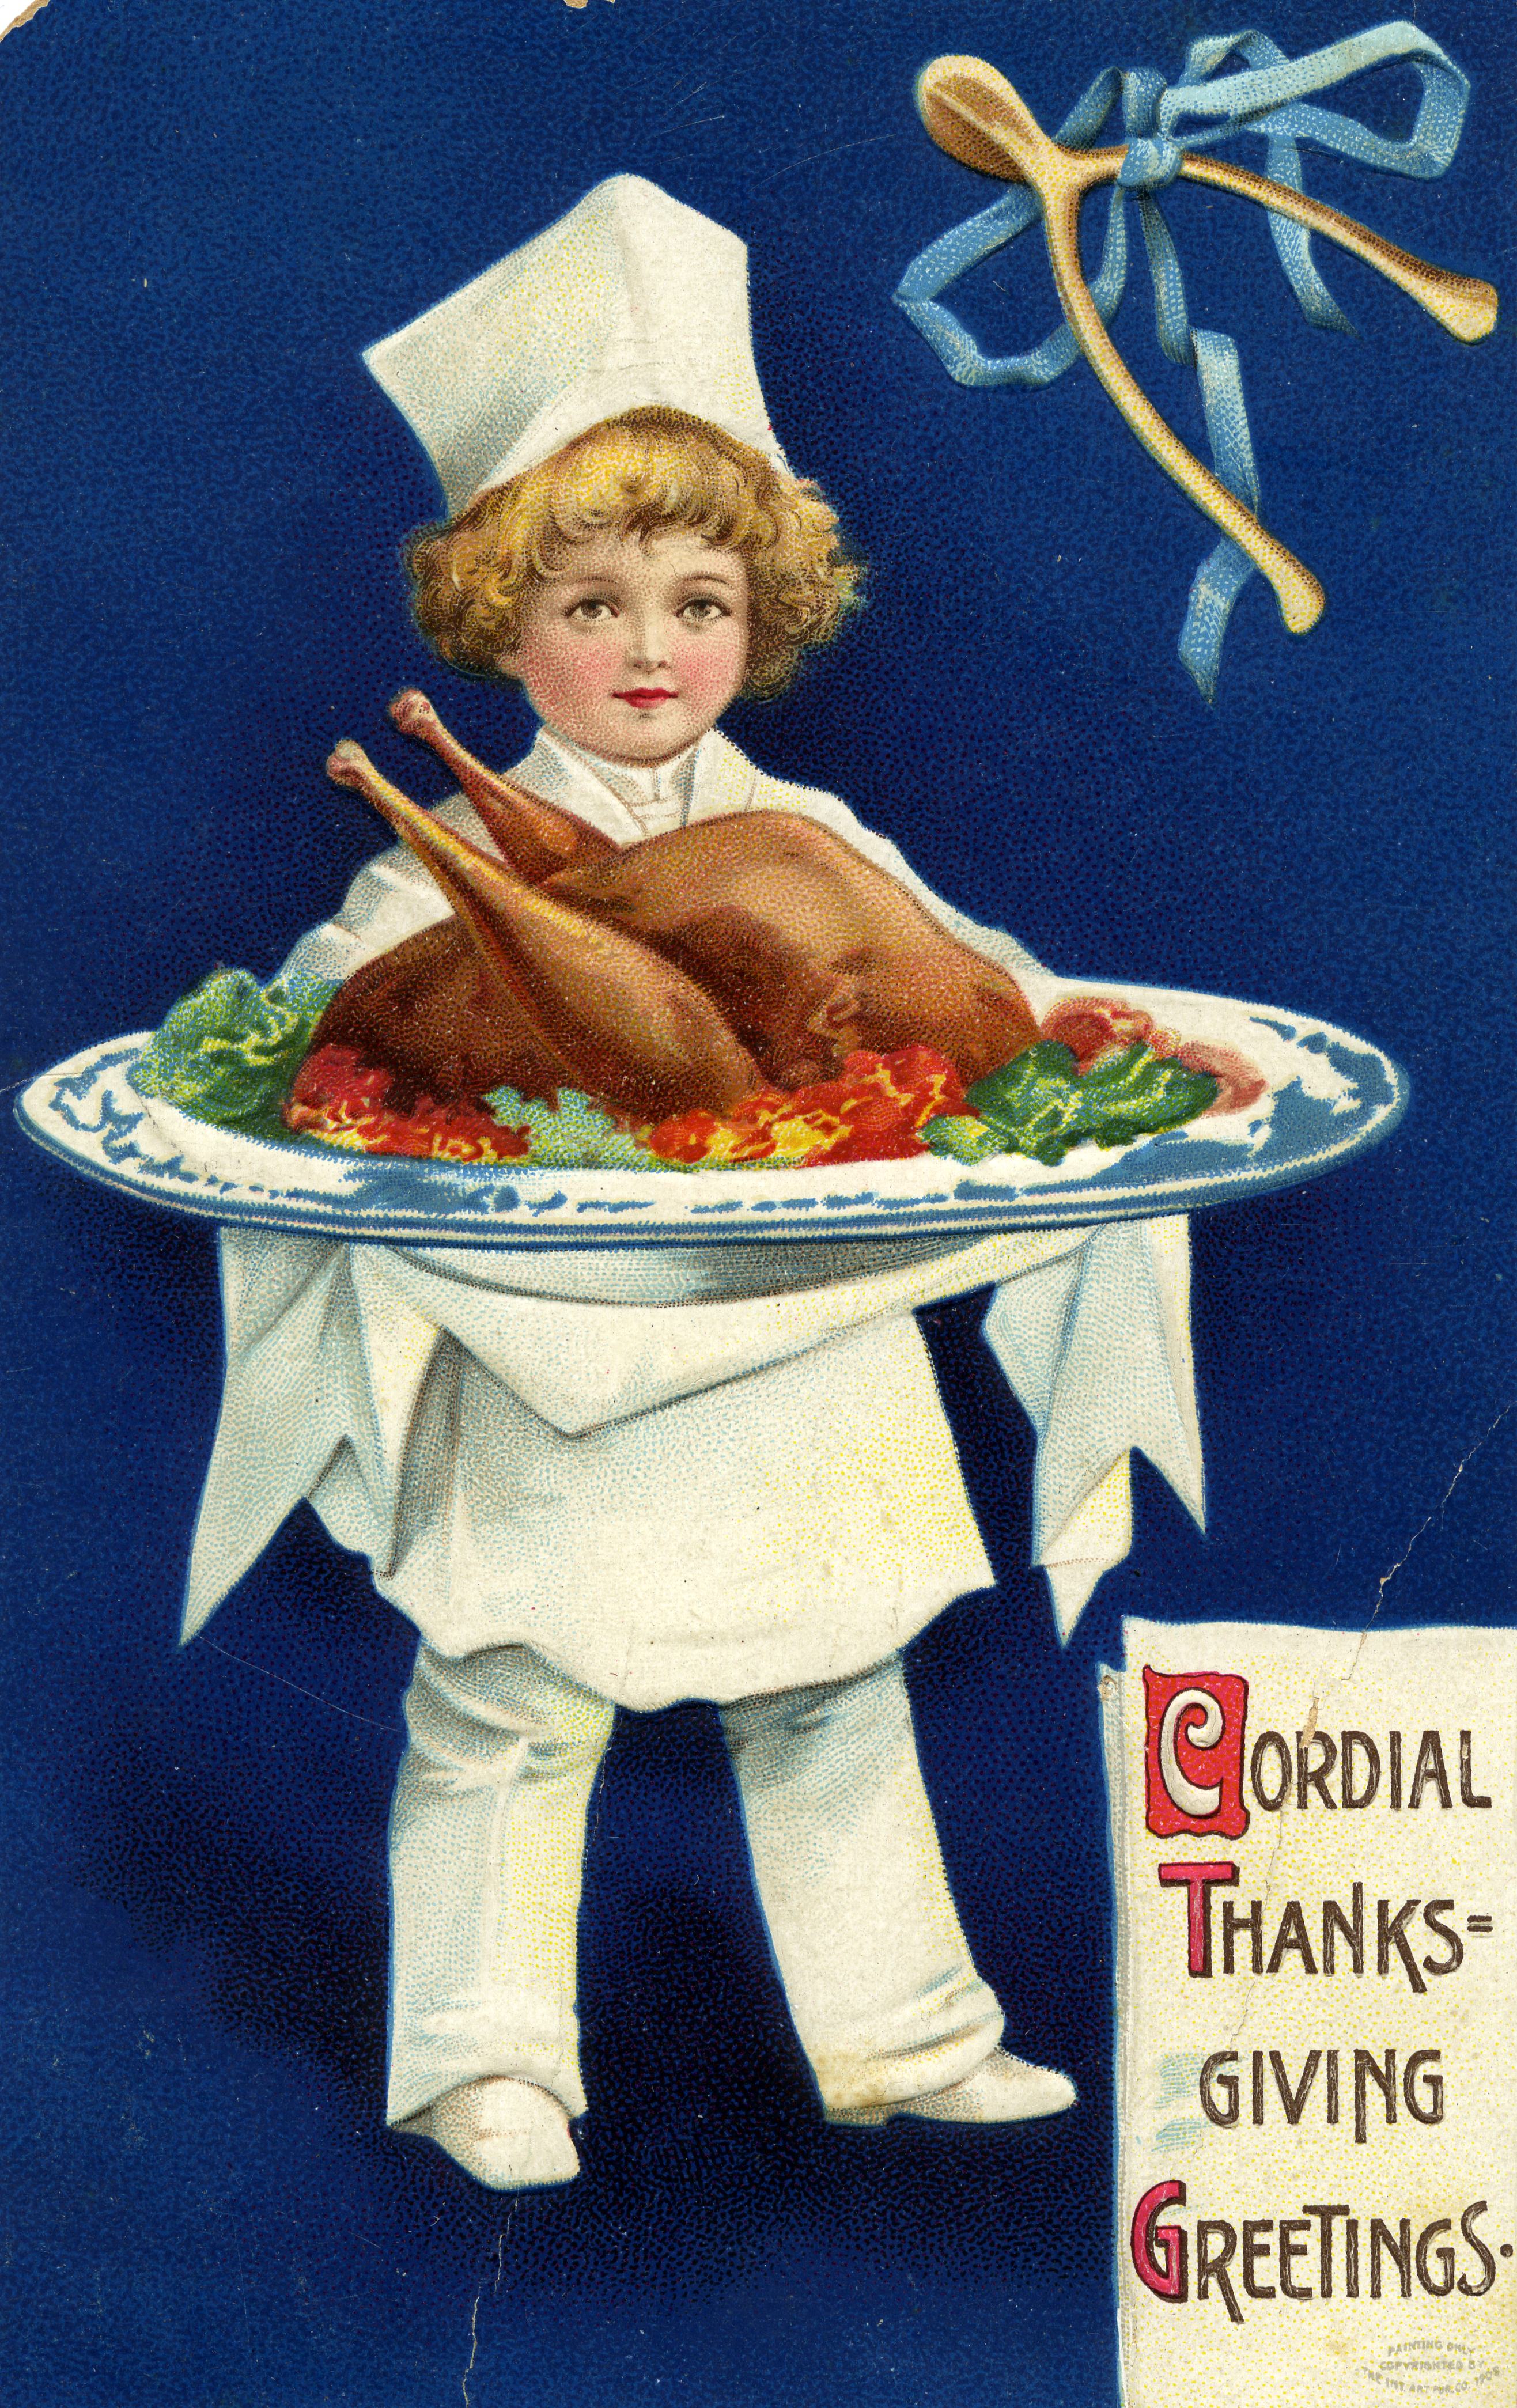 Postcard will illustration of a child dressed as a chef carrying a large platter of turkey.